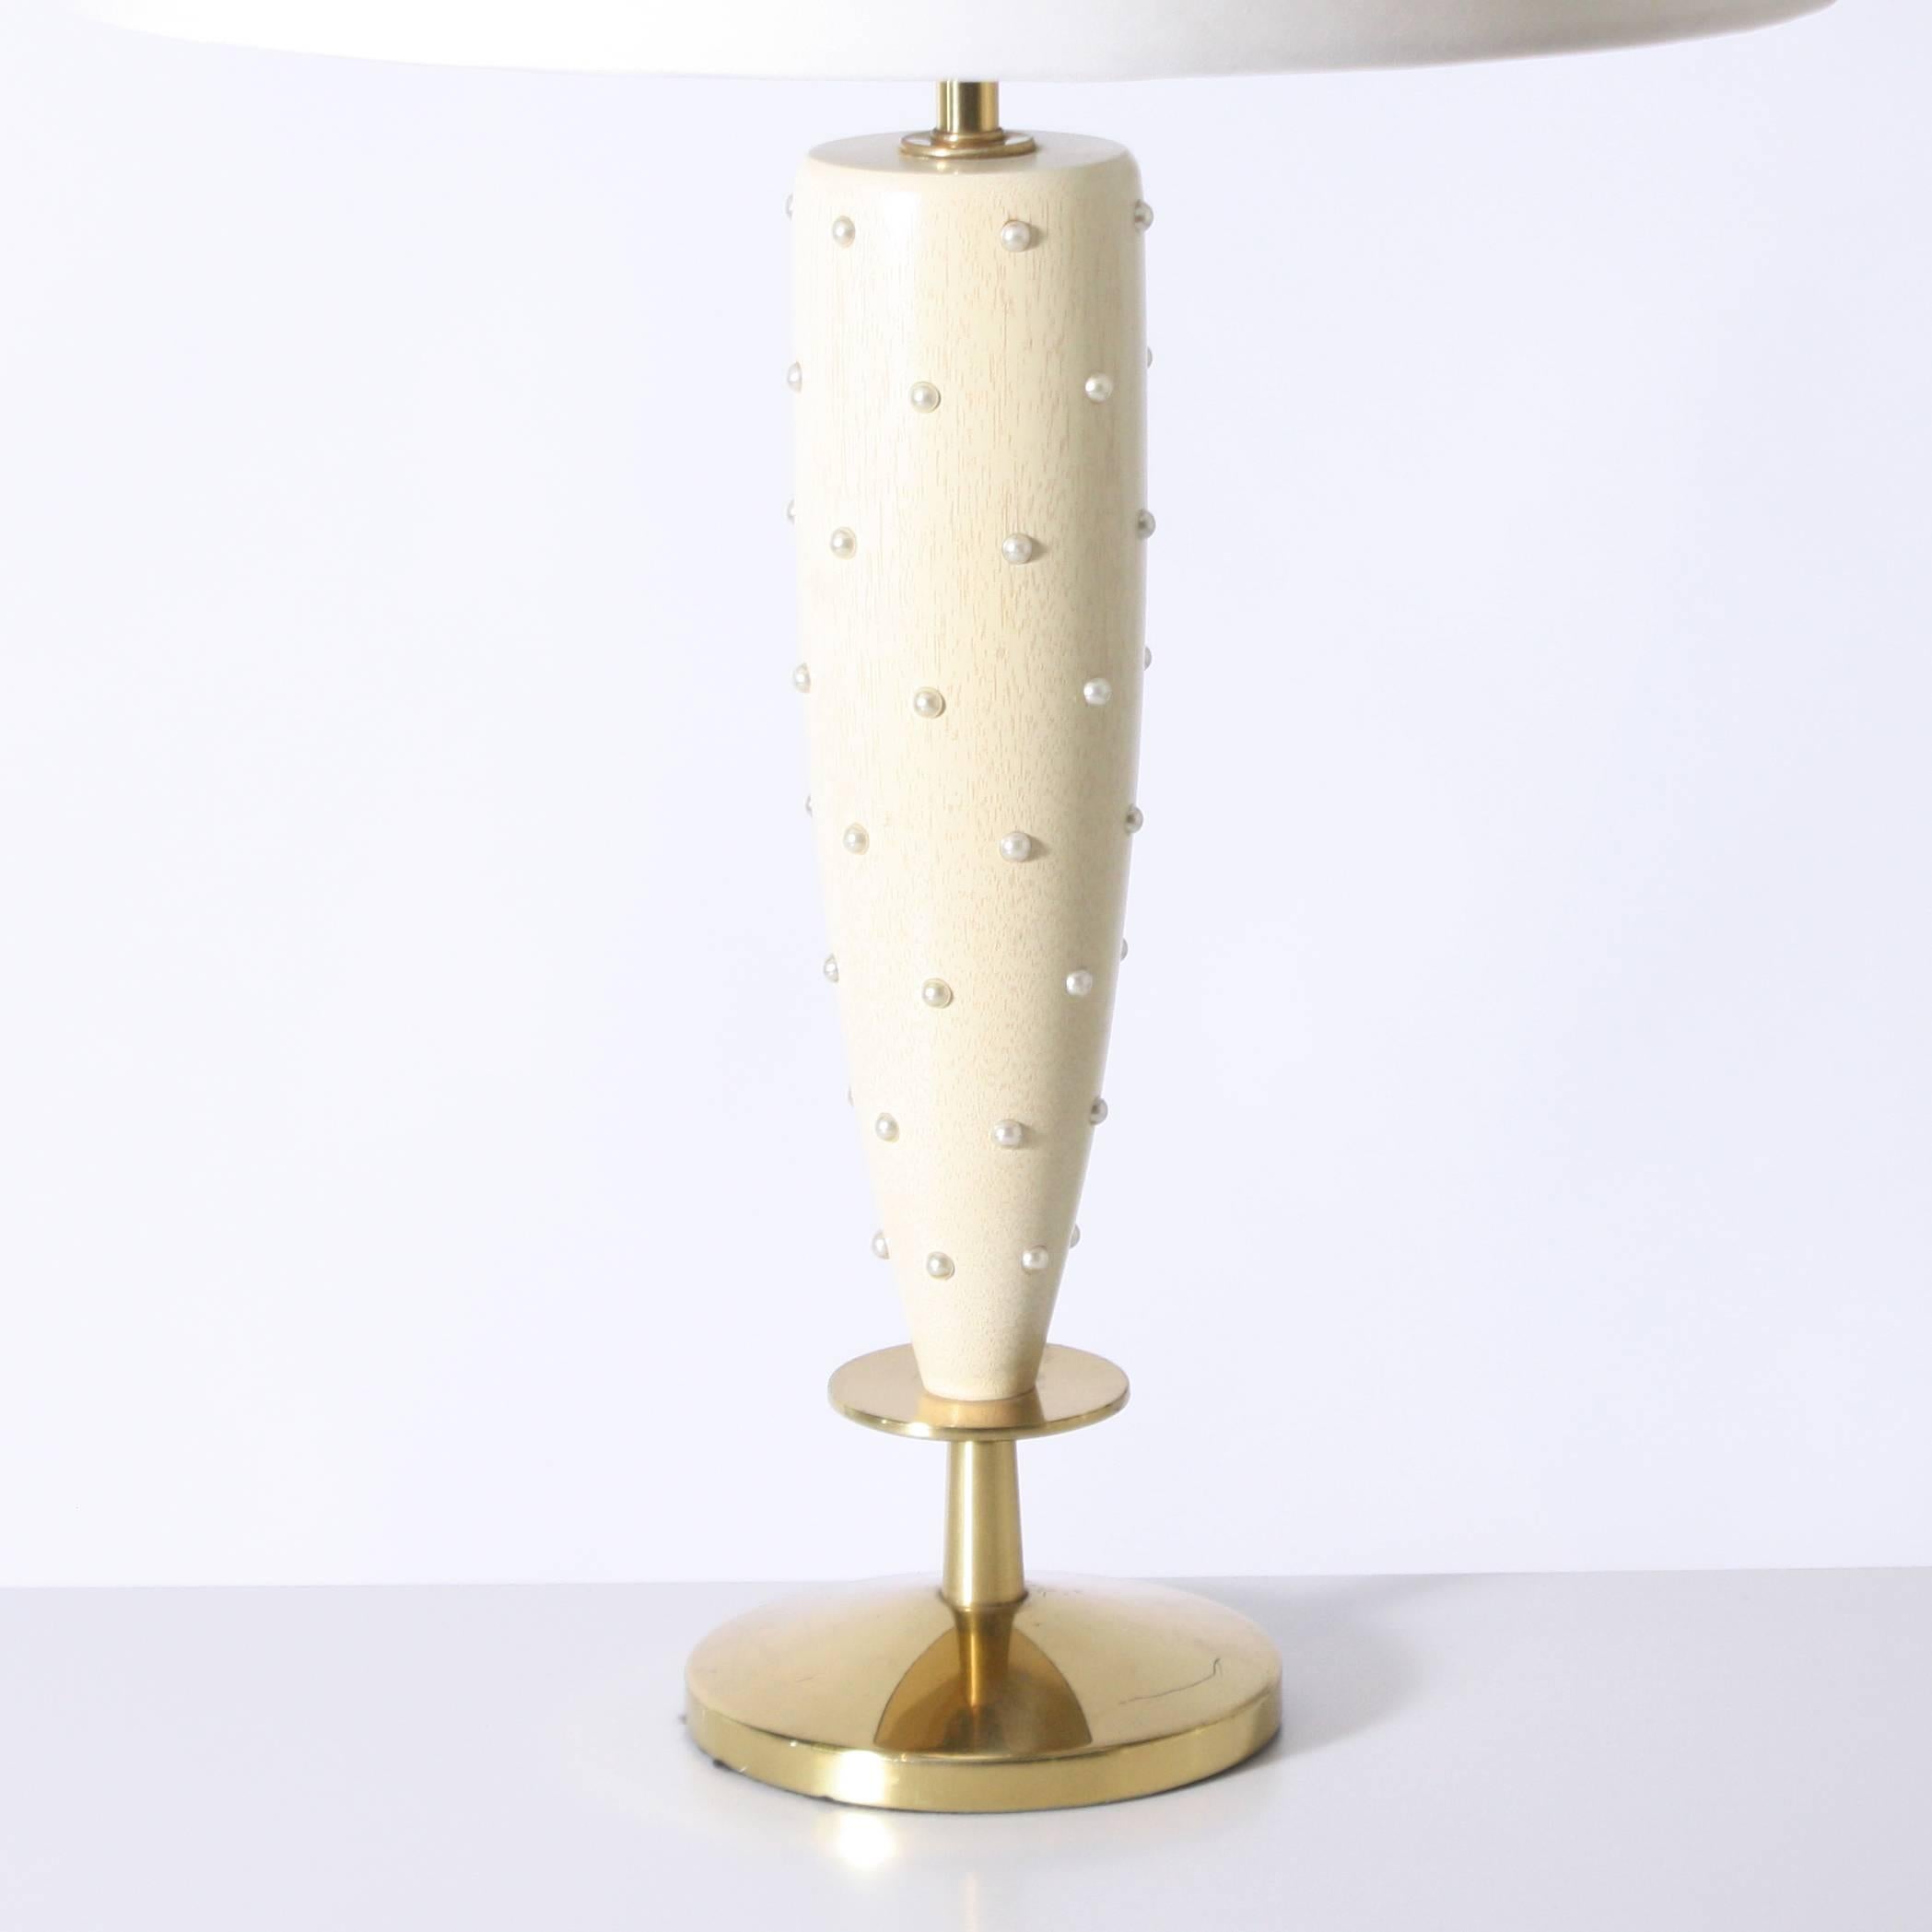 Pair of lamps in the style of Tommi Parzinger

Shade is 17 1/2" diameter X 29"h overall
